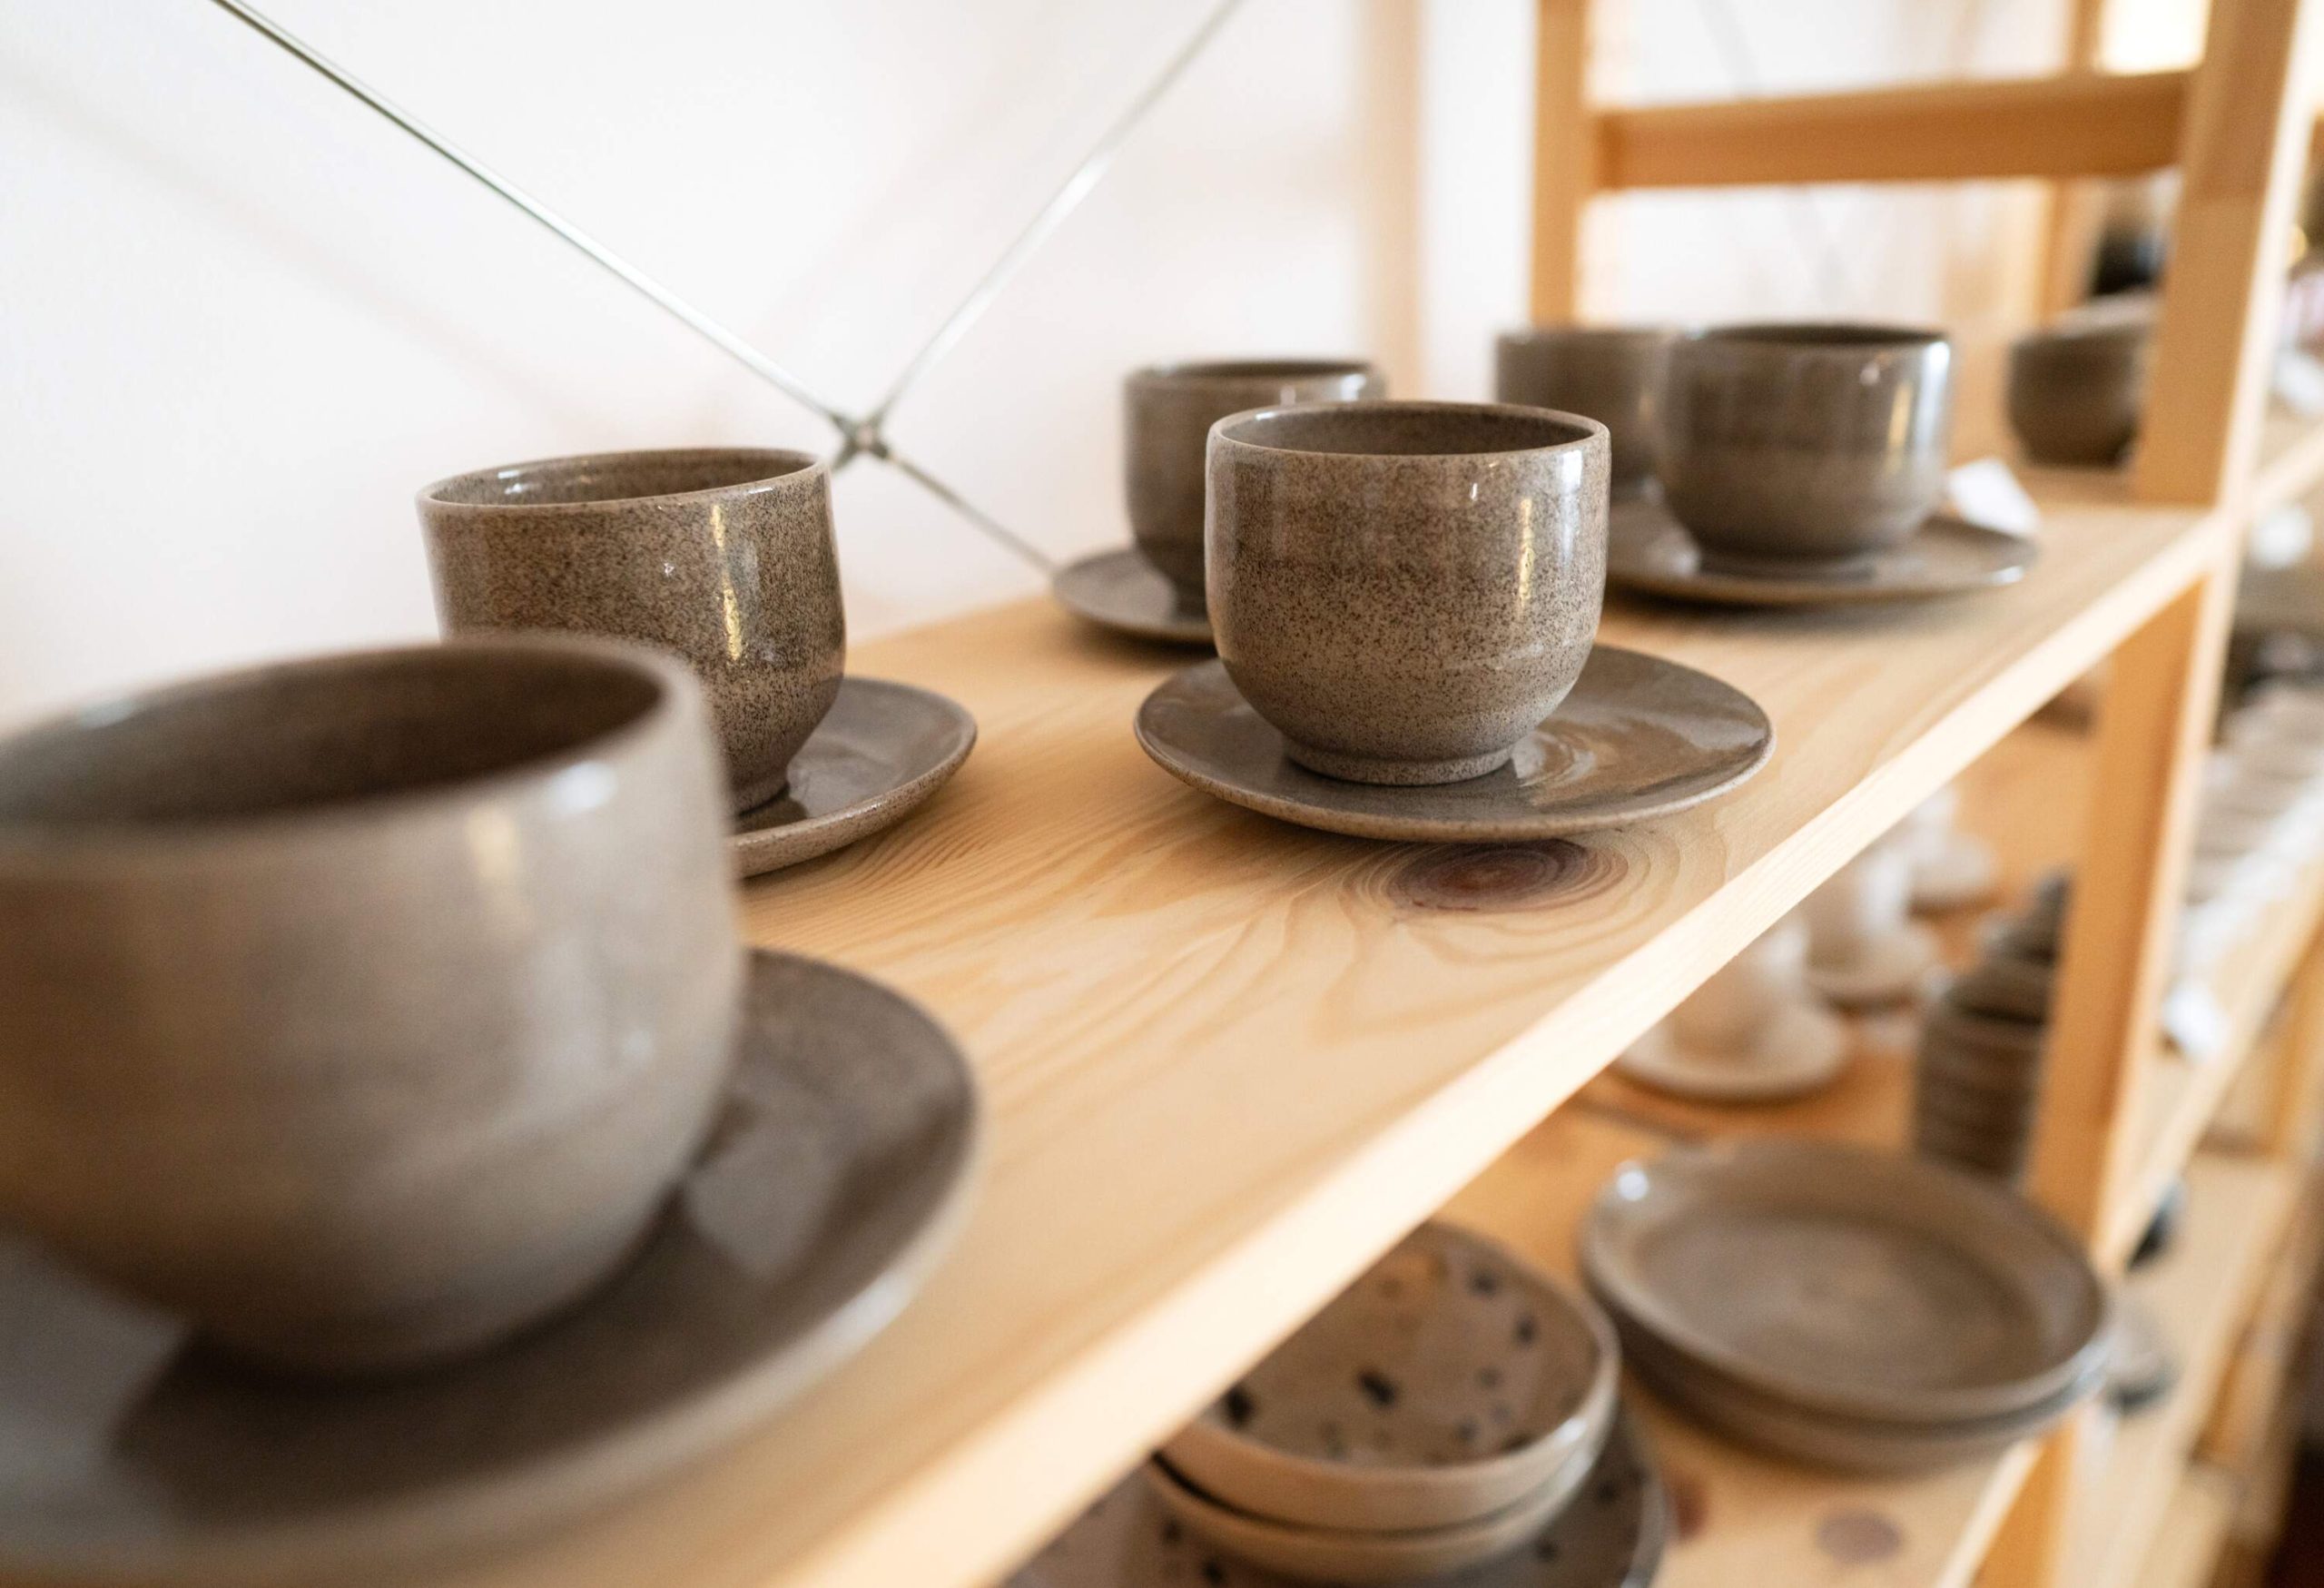 Close-up of sparkling ceramic cups and saucers on a wooden rack.